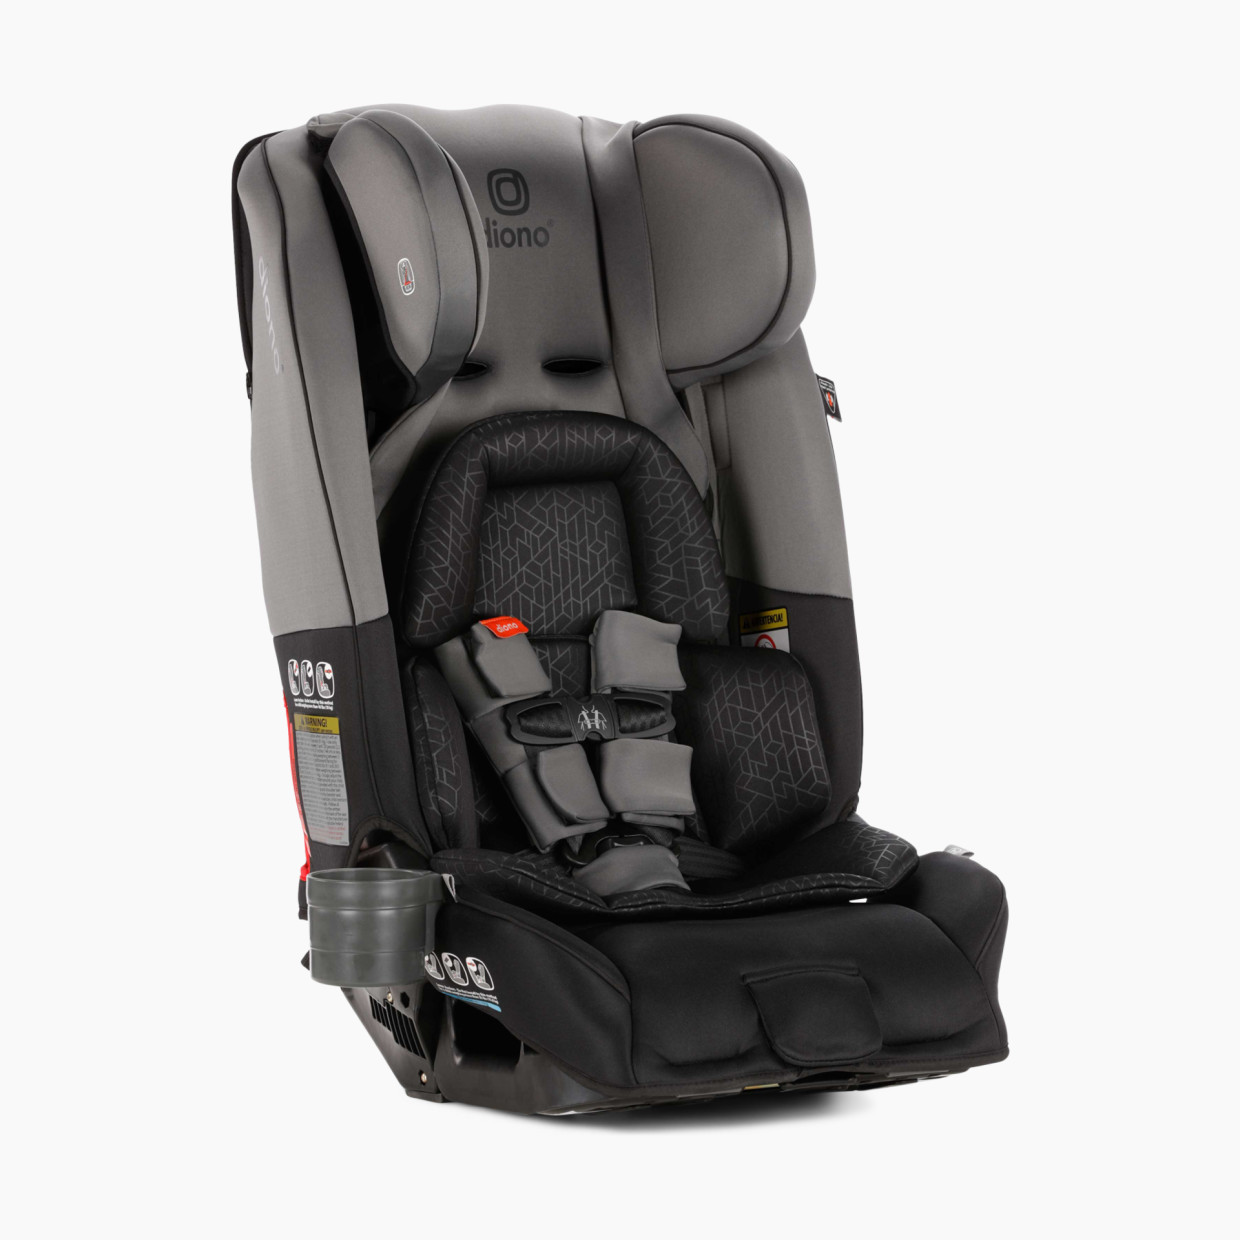 Diono Radian 3 RXT All-In-One Convertible Car Seat - Grey Dark.